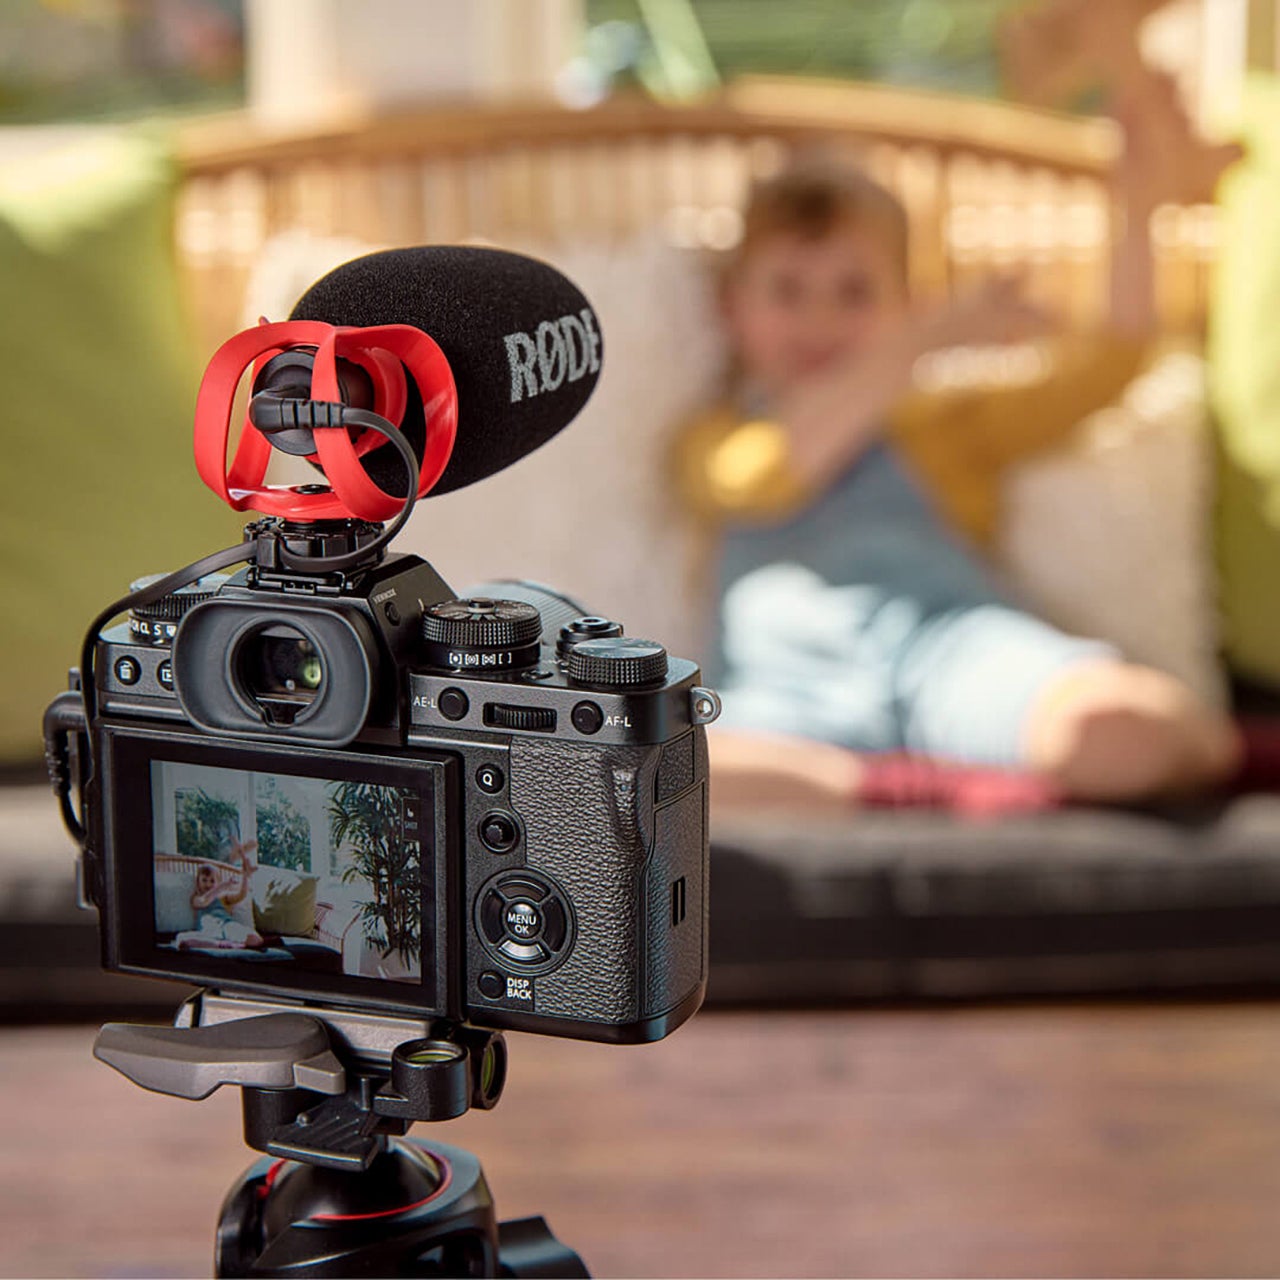 The Rode VideoMicro II is the ideal vlogging microphone.